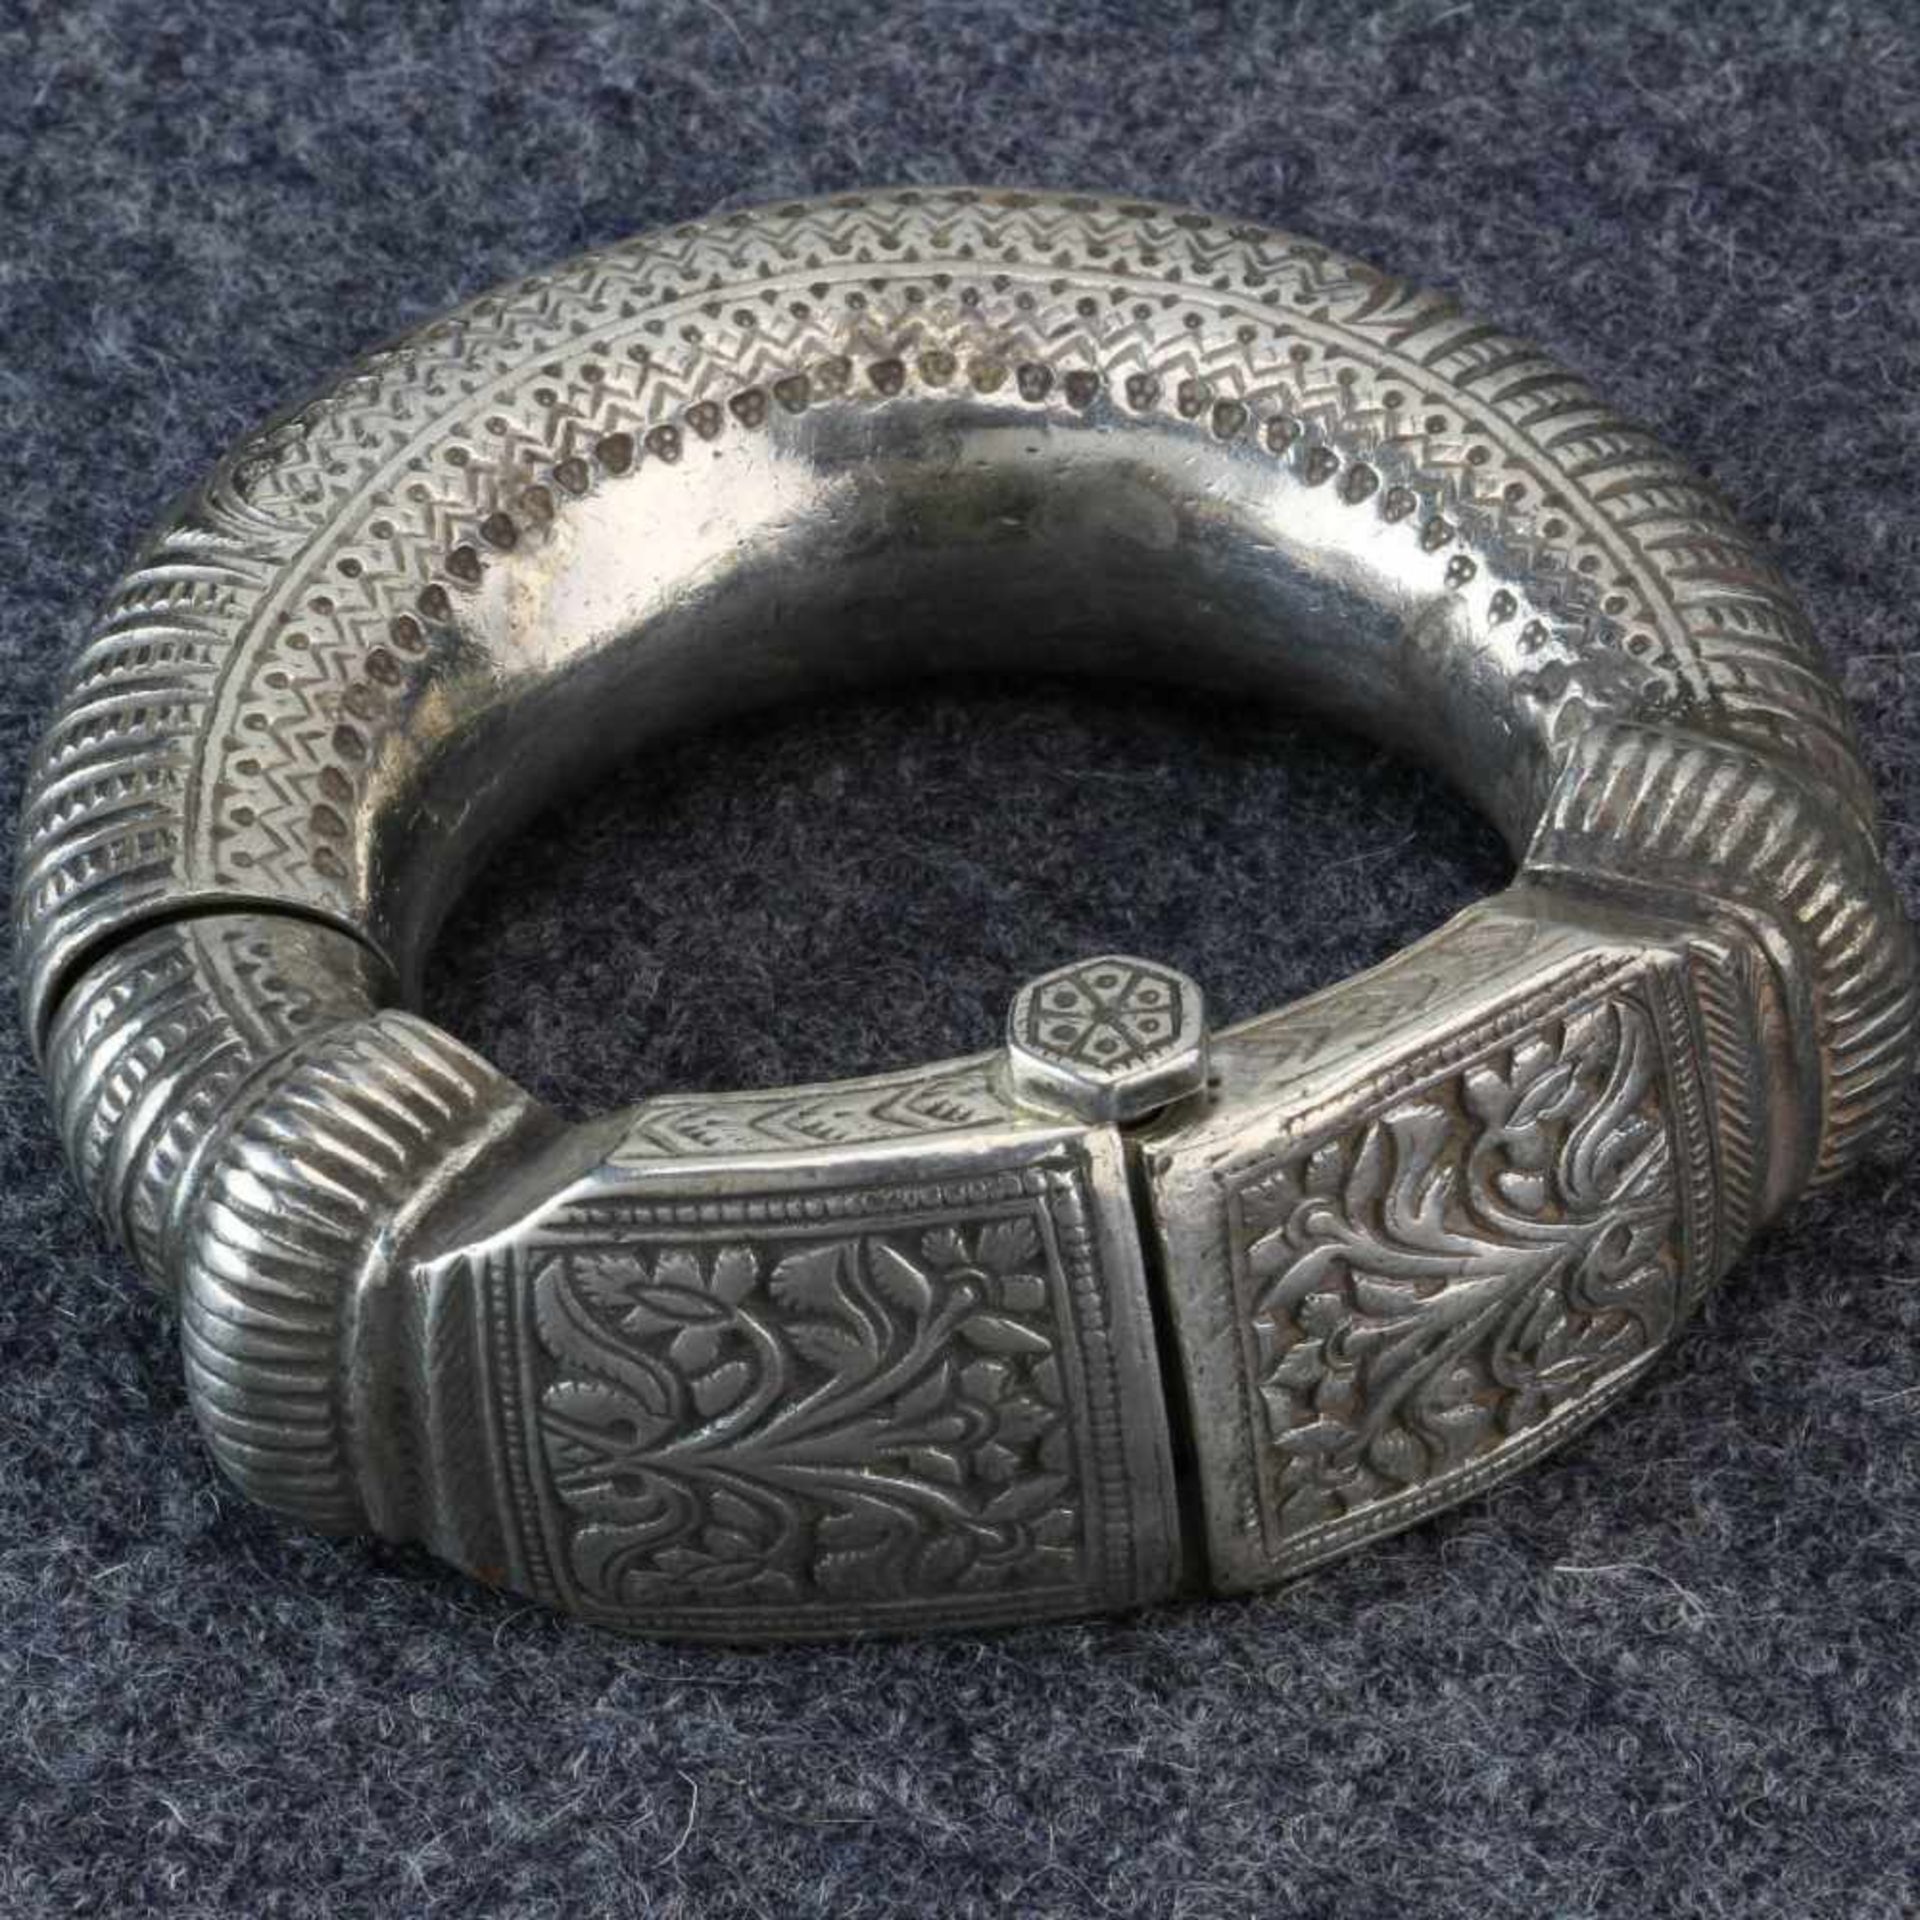 Oman, Nizwa, pair of silver ankletswith floral and leaf design. Can be opened by means of peg middle - Bild 2 aus 3